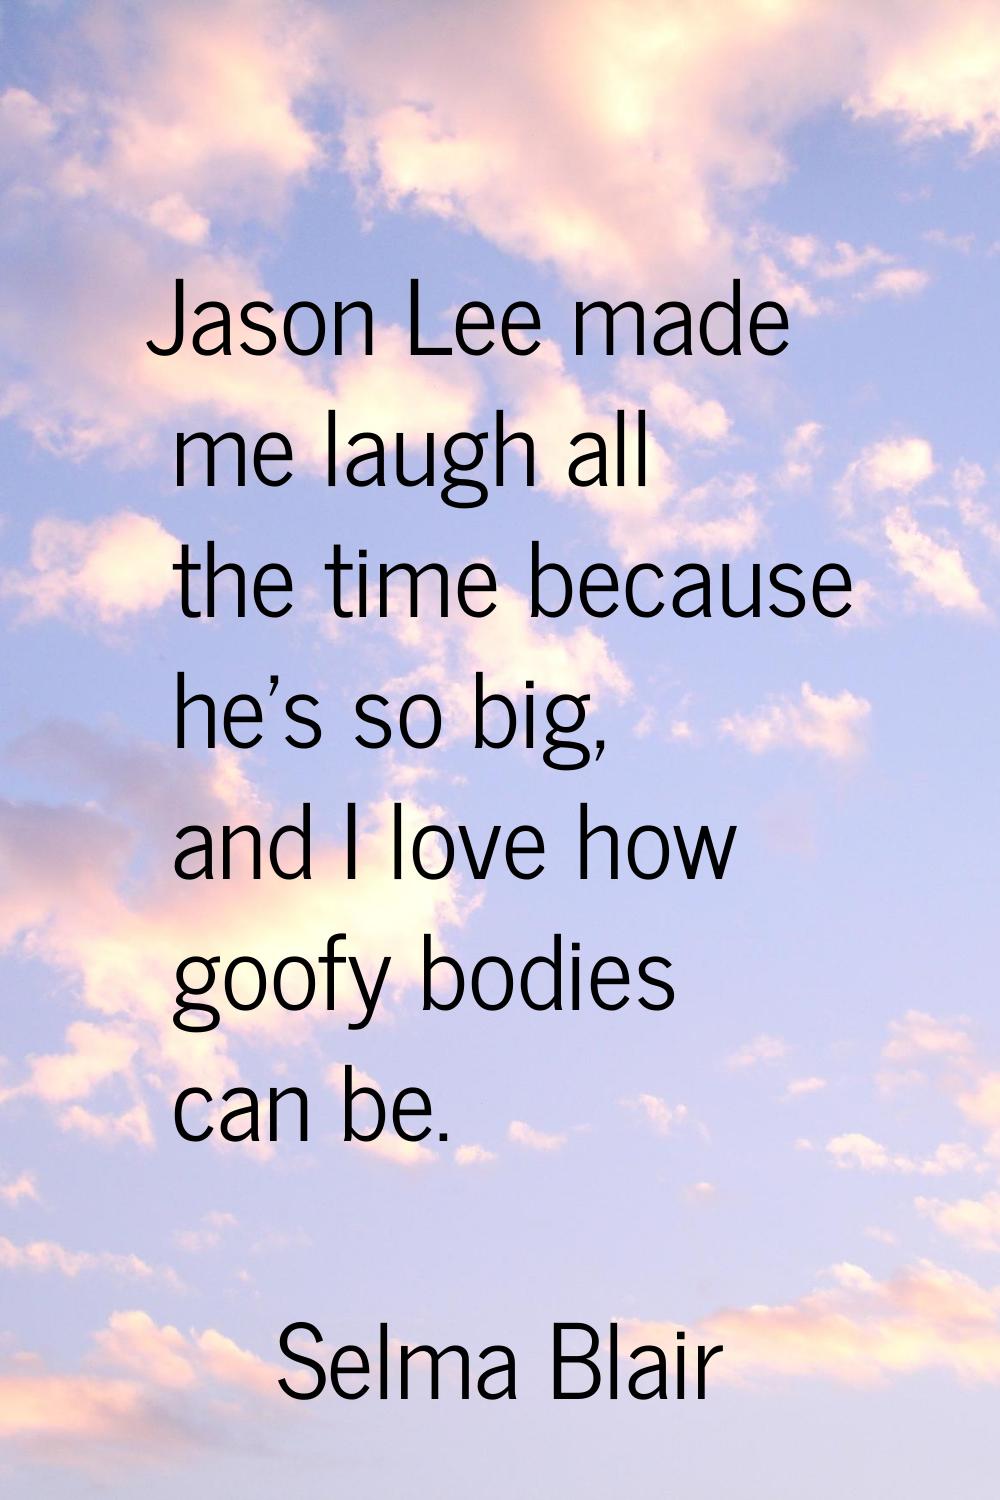 Jason Lee made me laugh all the time because he's so big, and I love how goofy bodies can be.